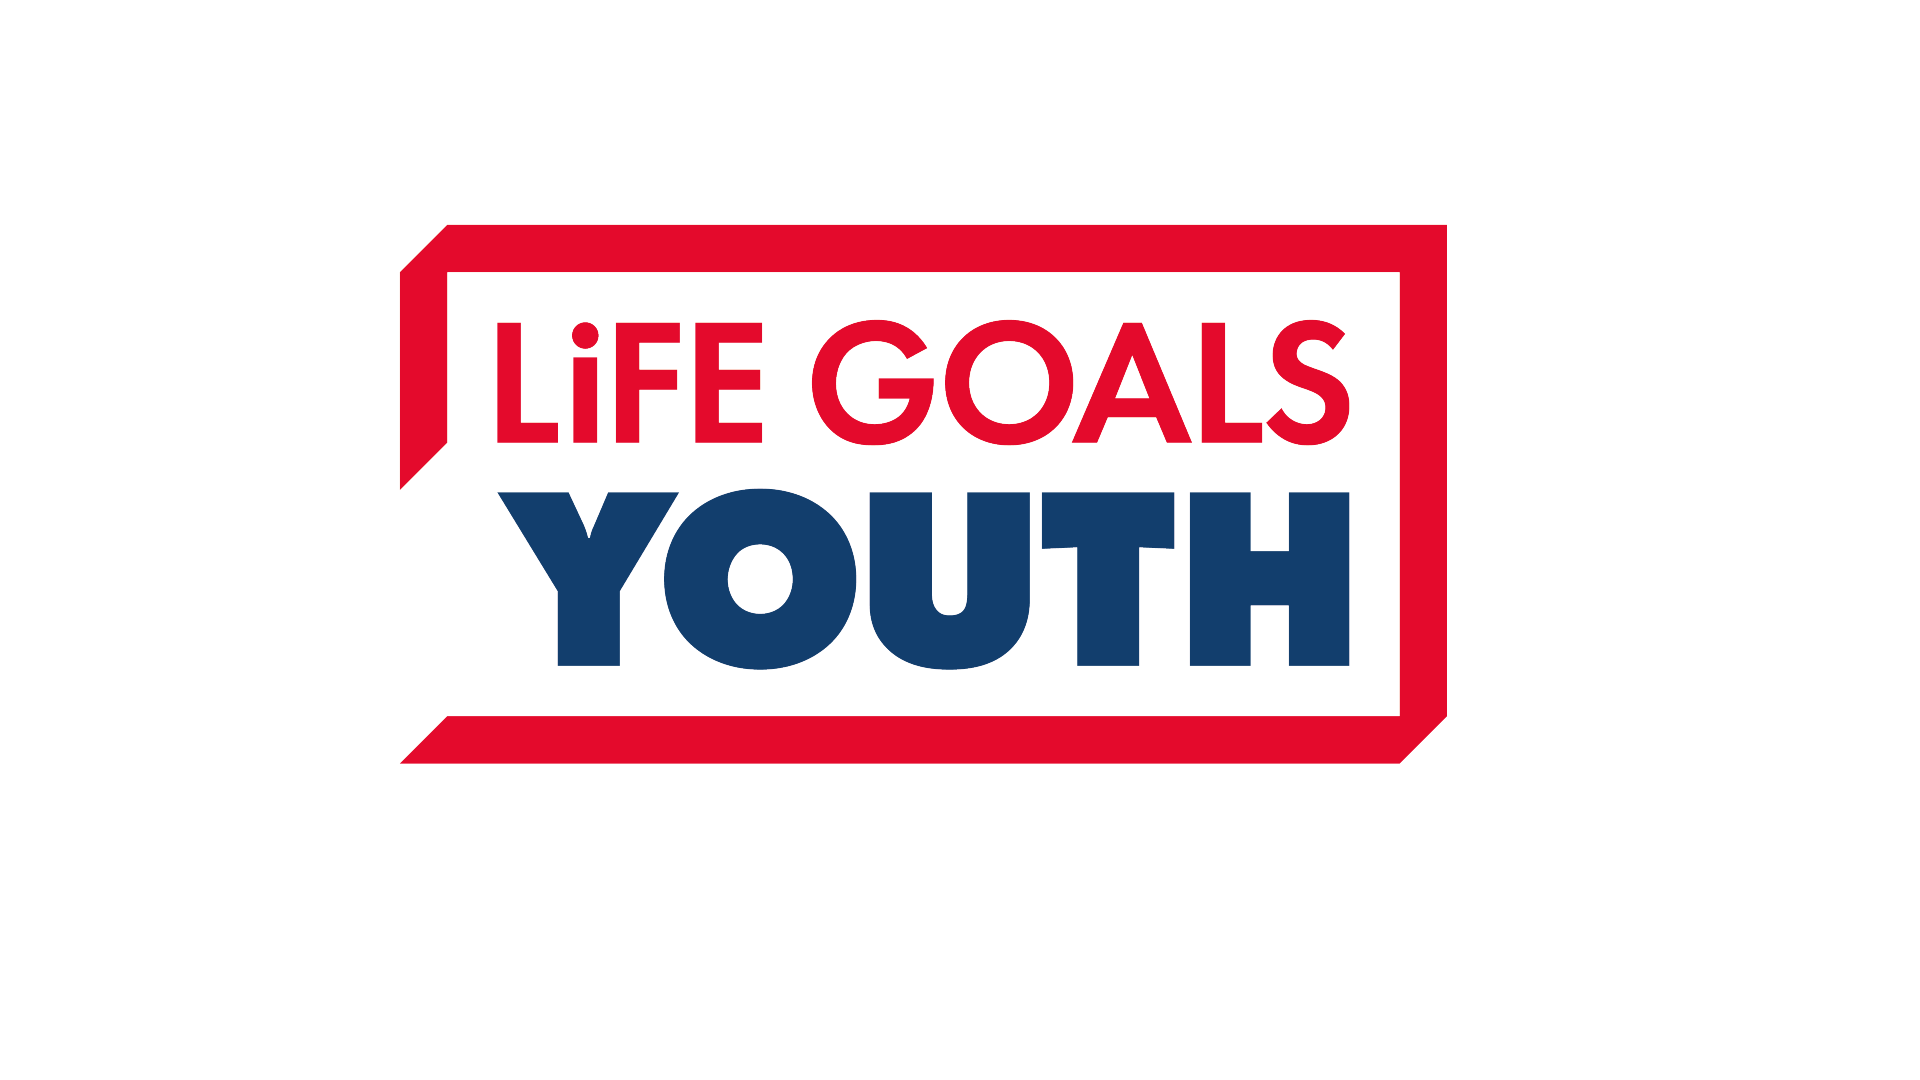 Life Goals Youth